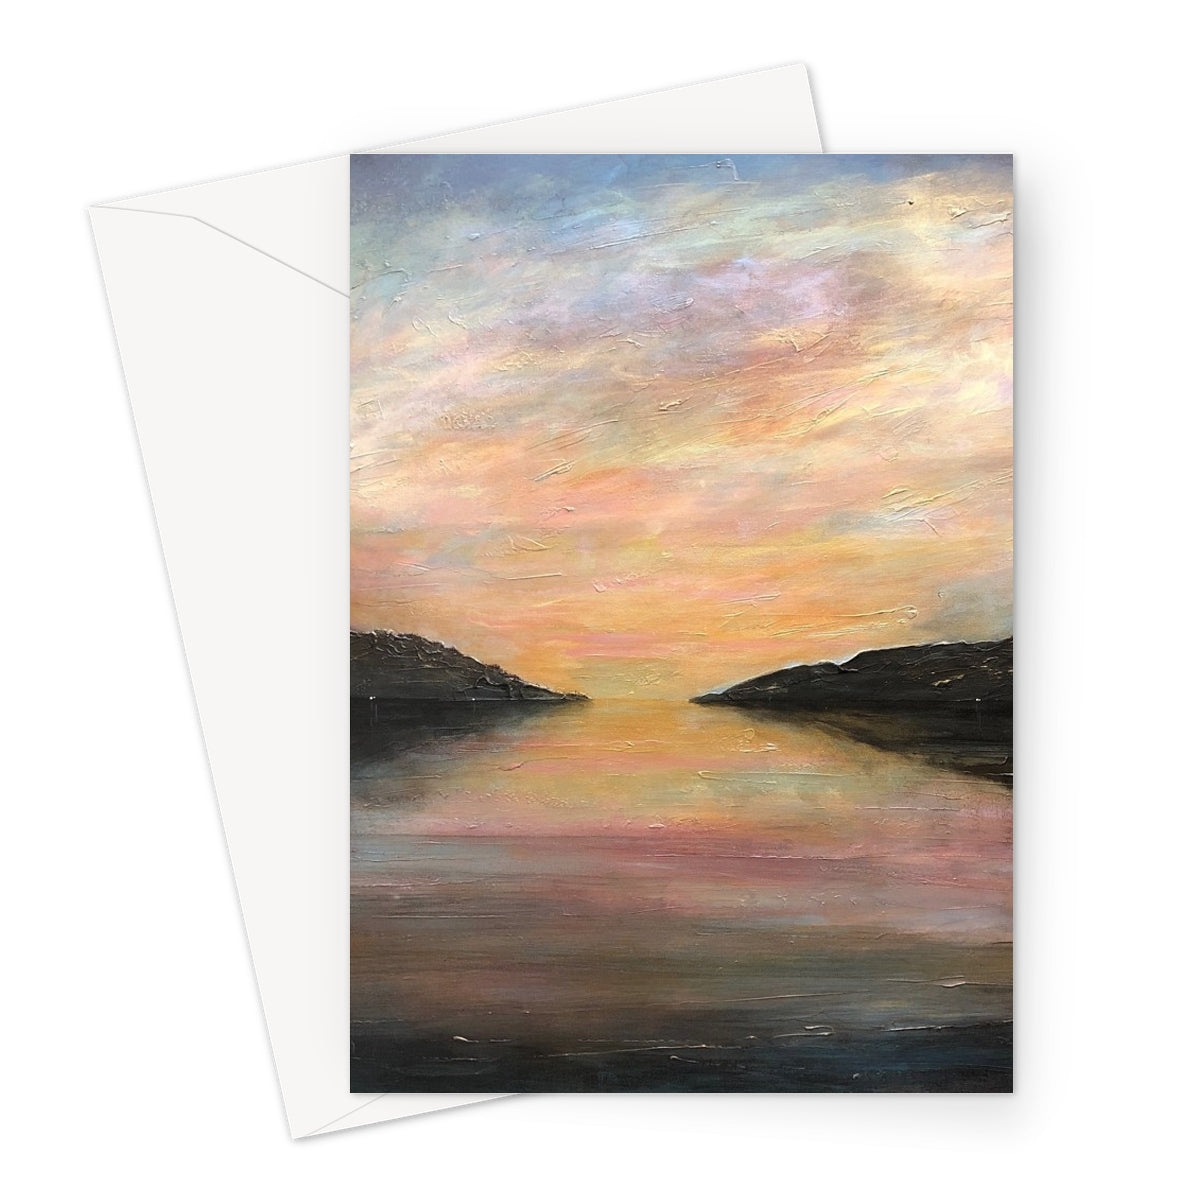 Loch Ness Glow Art Gifts Greeting Card-Greetings Cards-Scottish Lochs & Mountains Art Gallery-A5 Portrait-1 Card-Paintings, Prints, Homeware, Art Gifts From Scotland By Scottish Artist Kevin Hunter